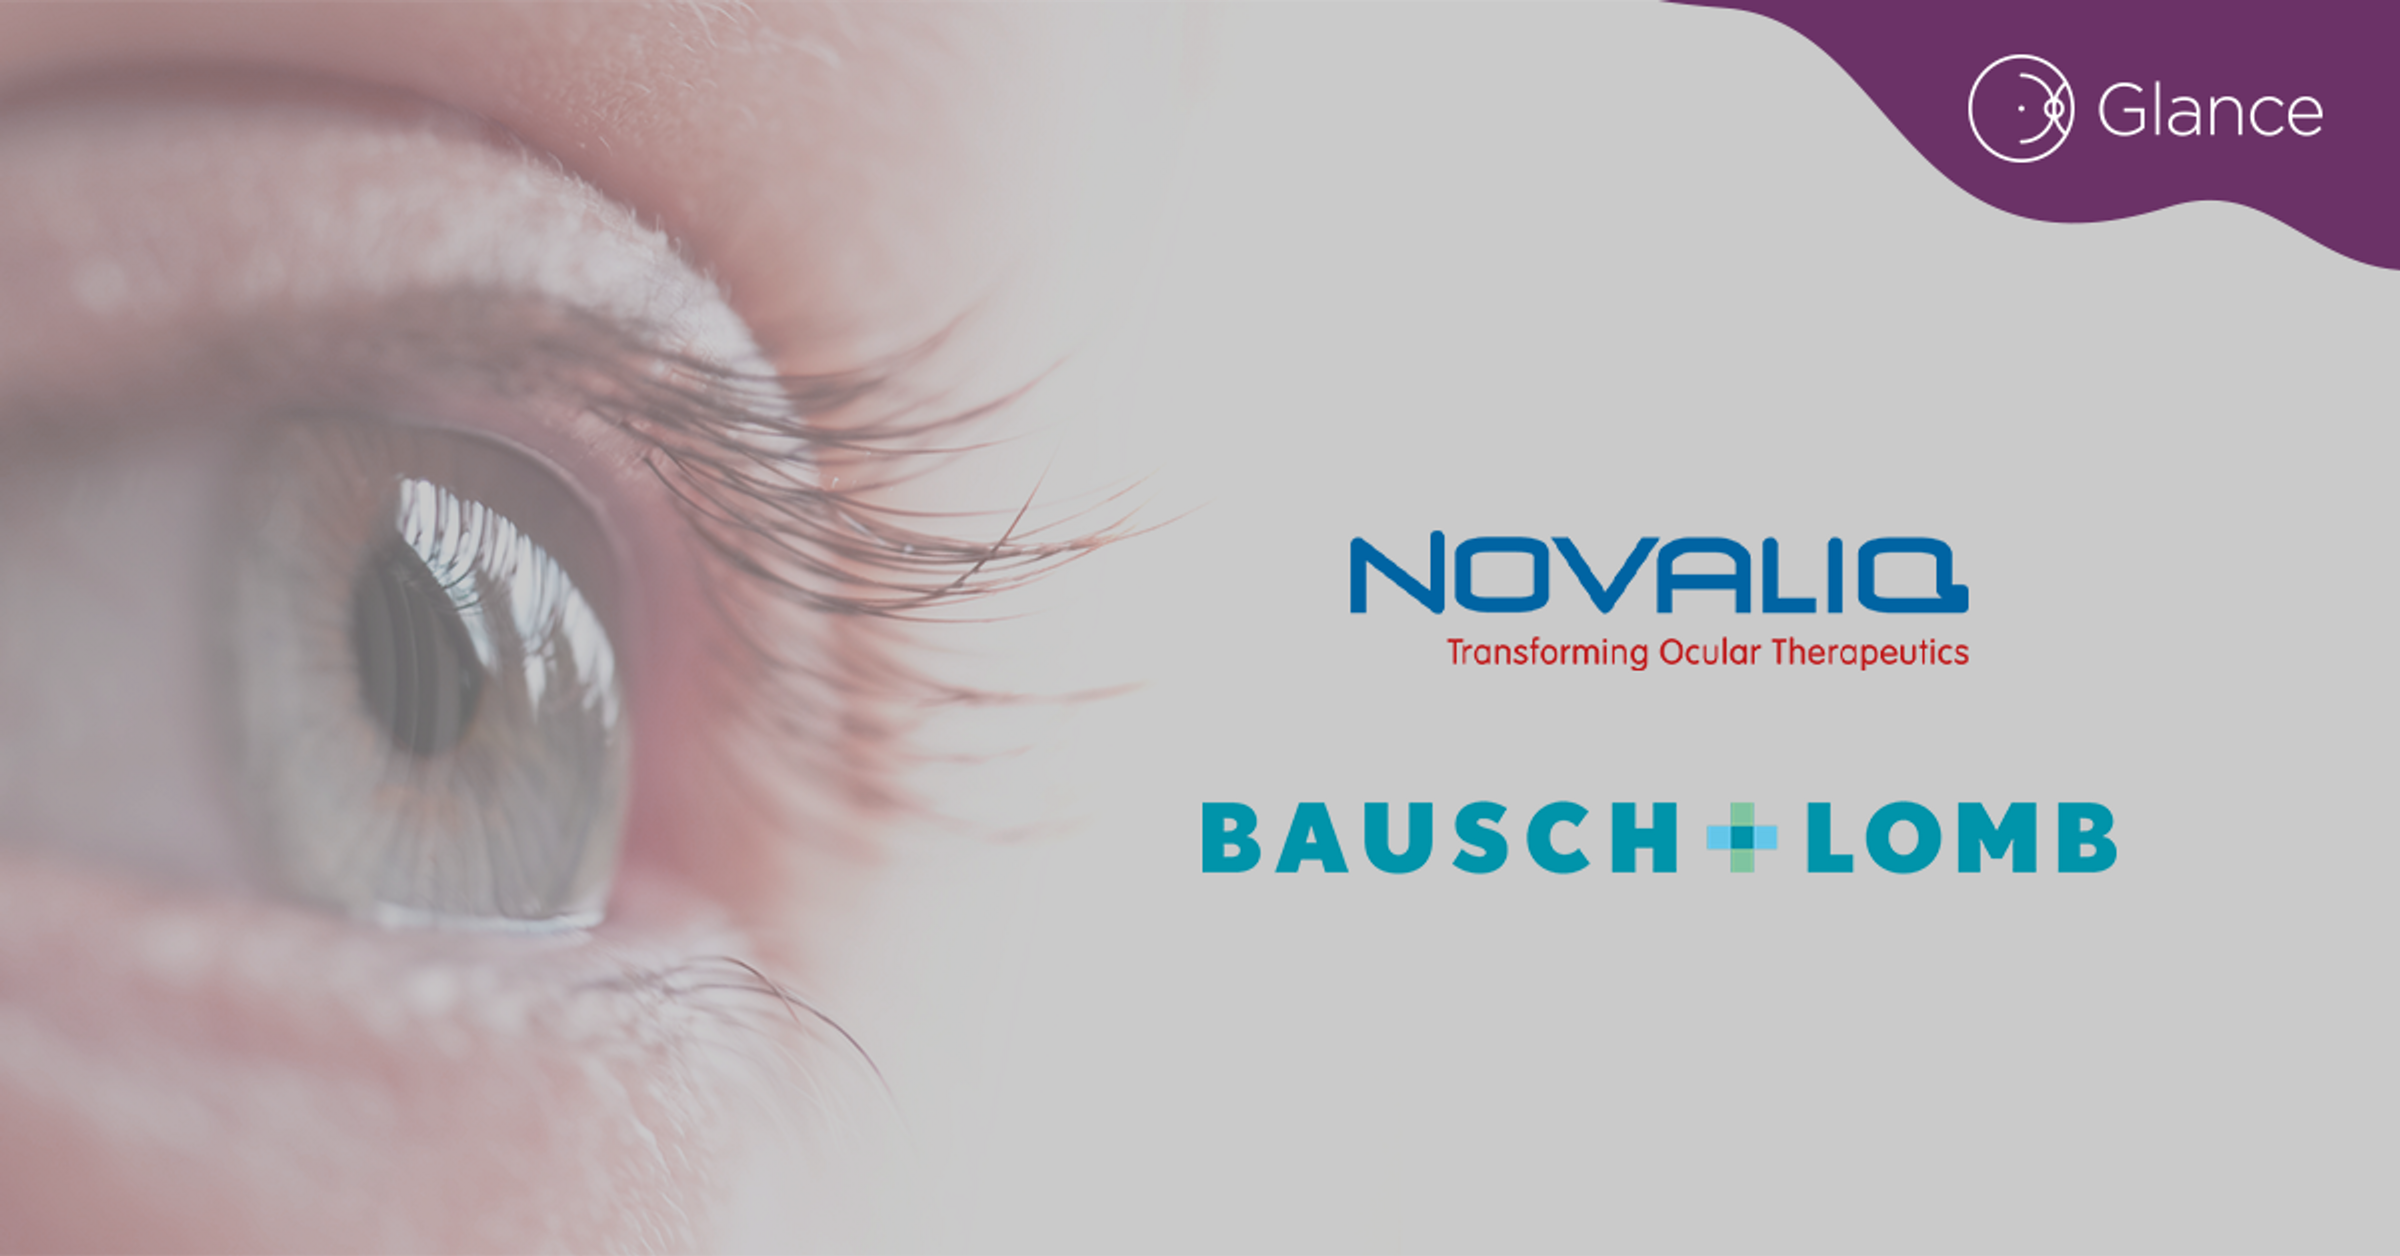 Bausch + Lomb, Novaliq release second phase 3 data for NOV03